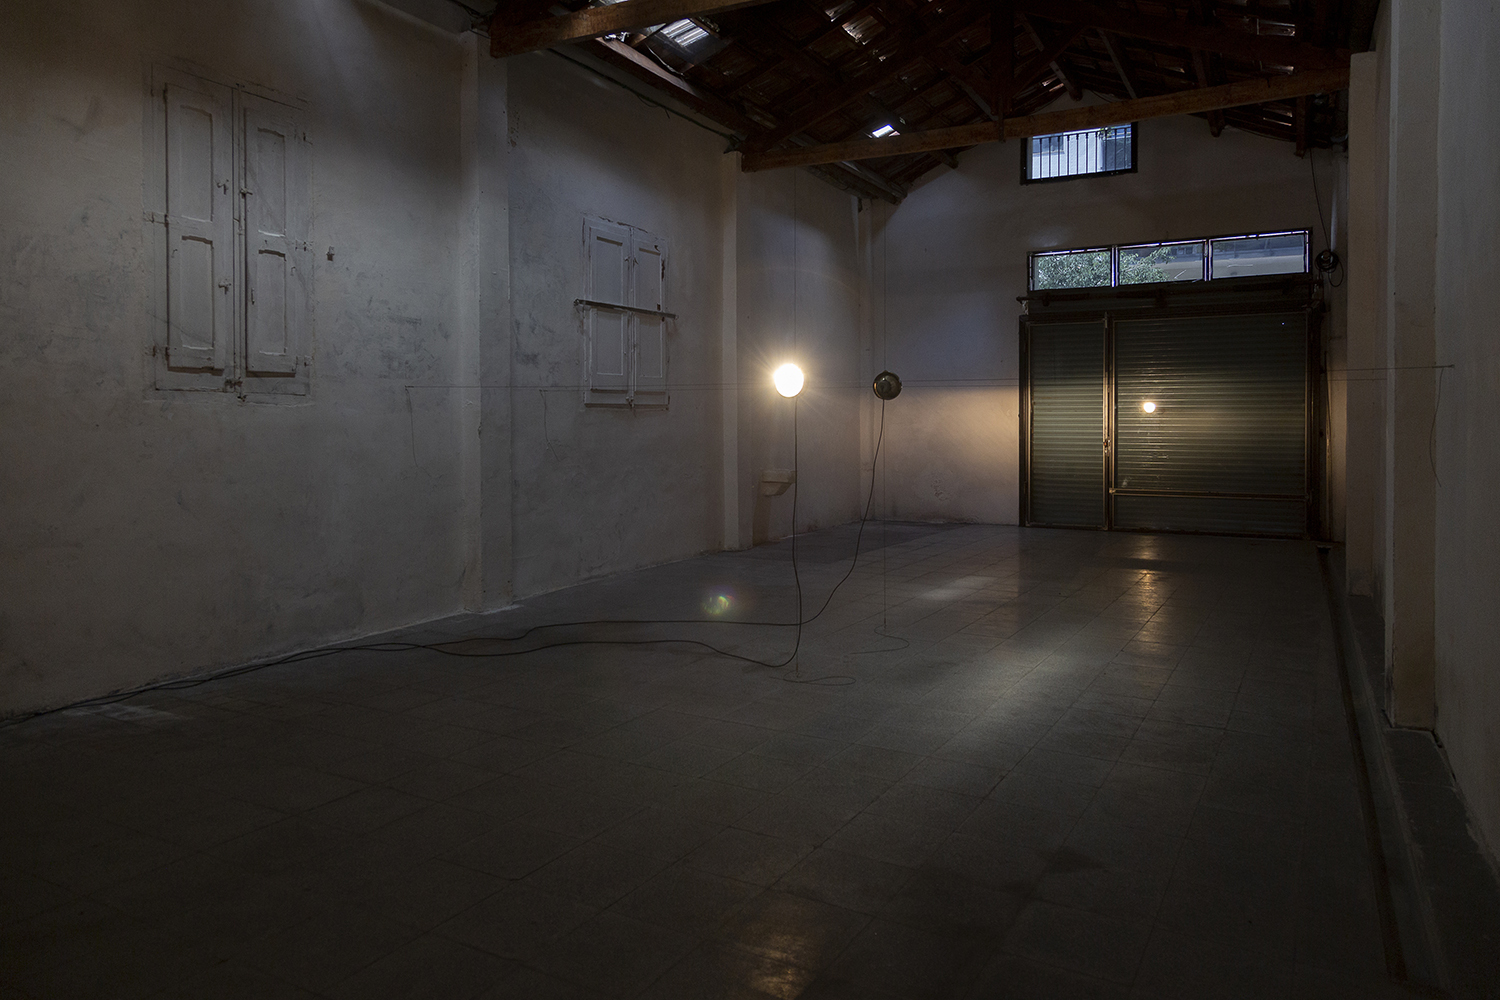 Installation views: "Is it like today?". Solo exhibition by Ian Waelder at ethall gallery in Barcelona, 2022